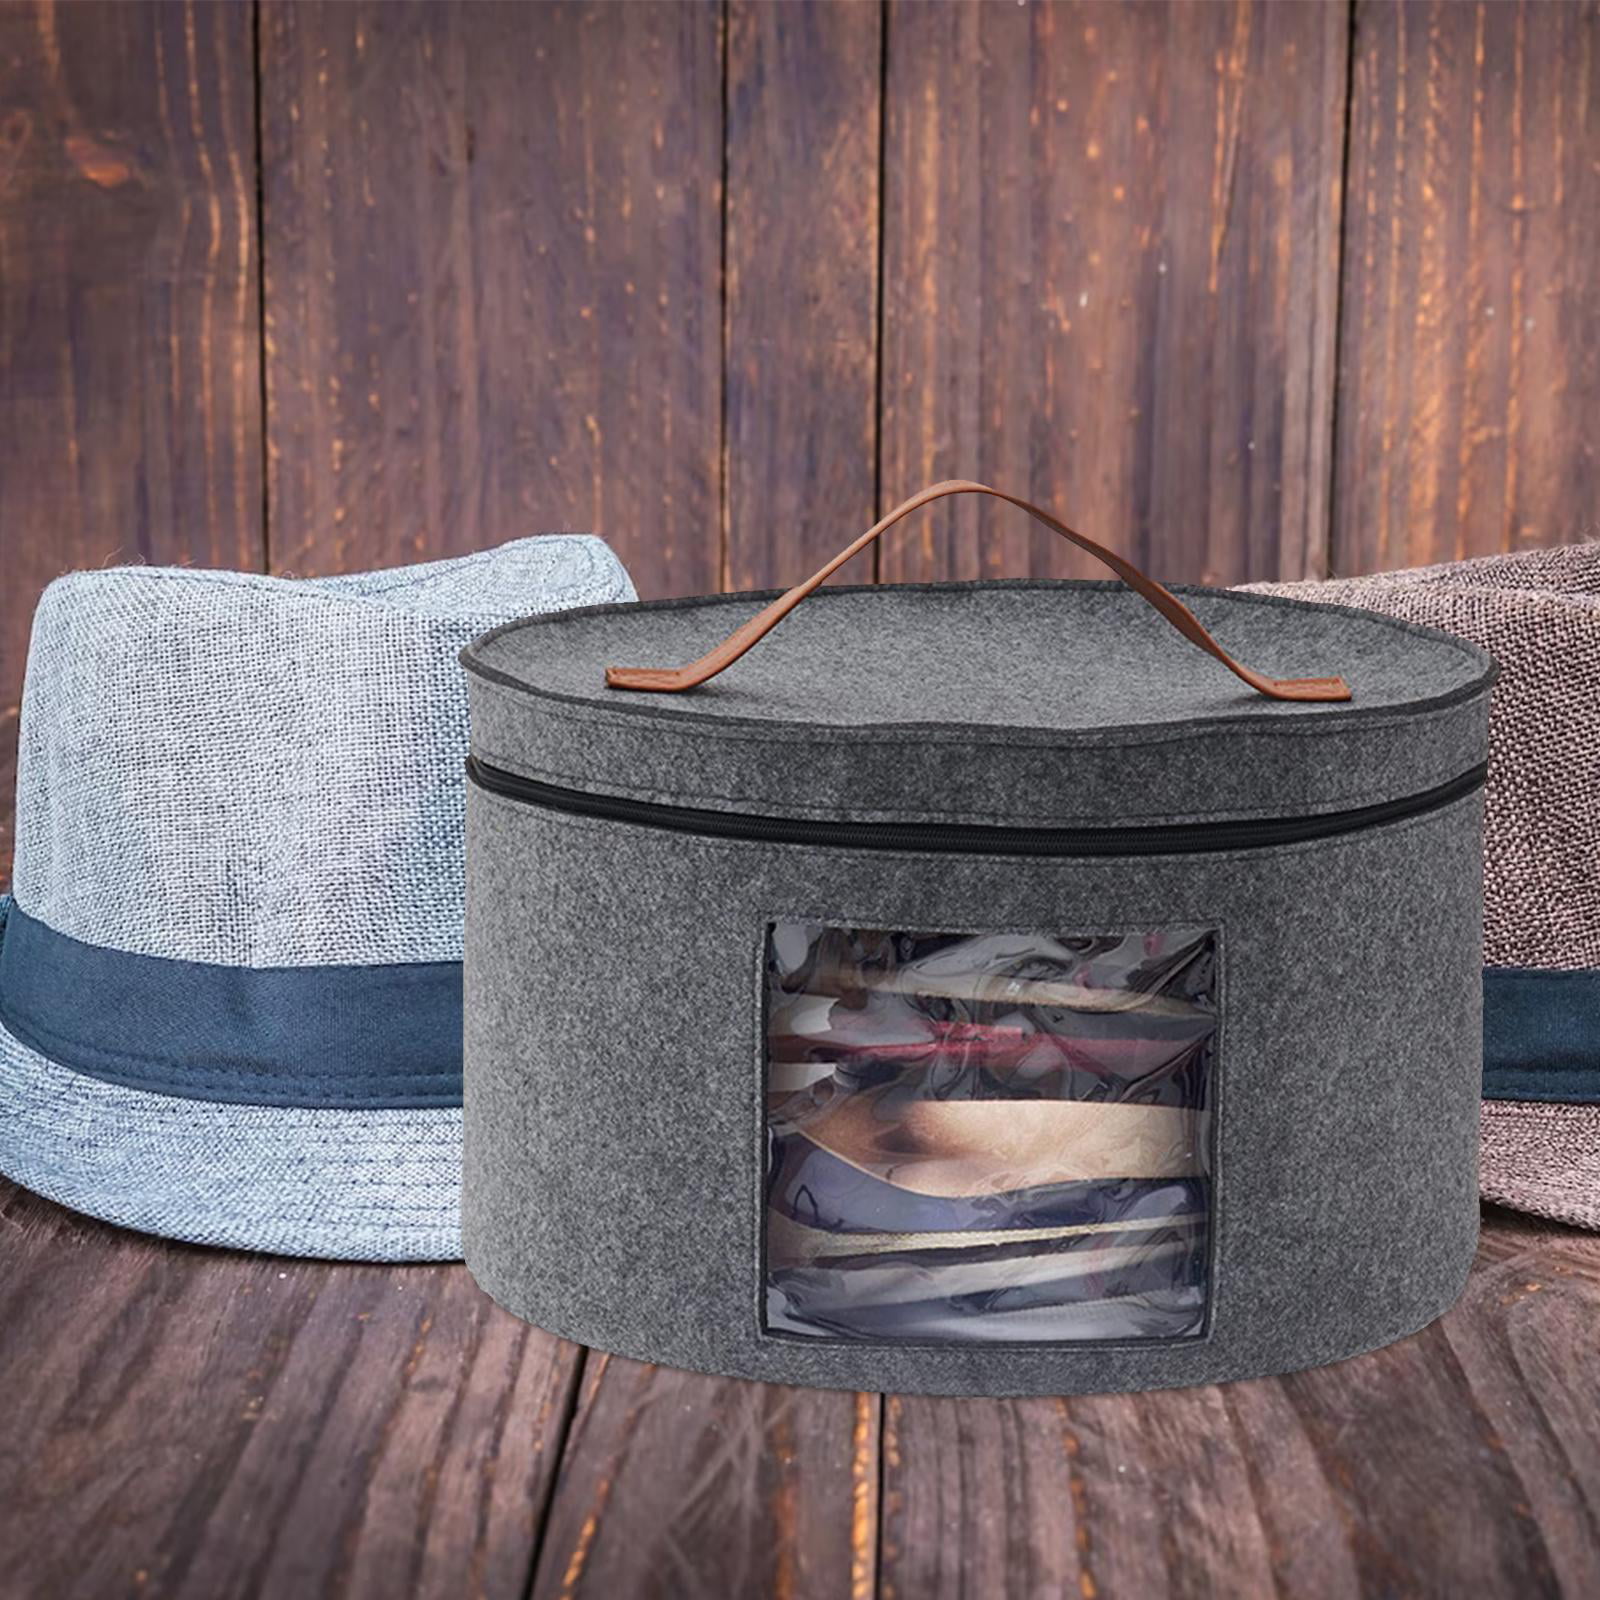 Ohiyoo Hat Box Hat Storage Box 16 x 8 Travel Hat Box Hat Boxes with Lids Round Hat Boxes for Women Storage Hat Foldable Box for Travel Stuffed Animal